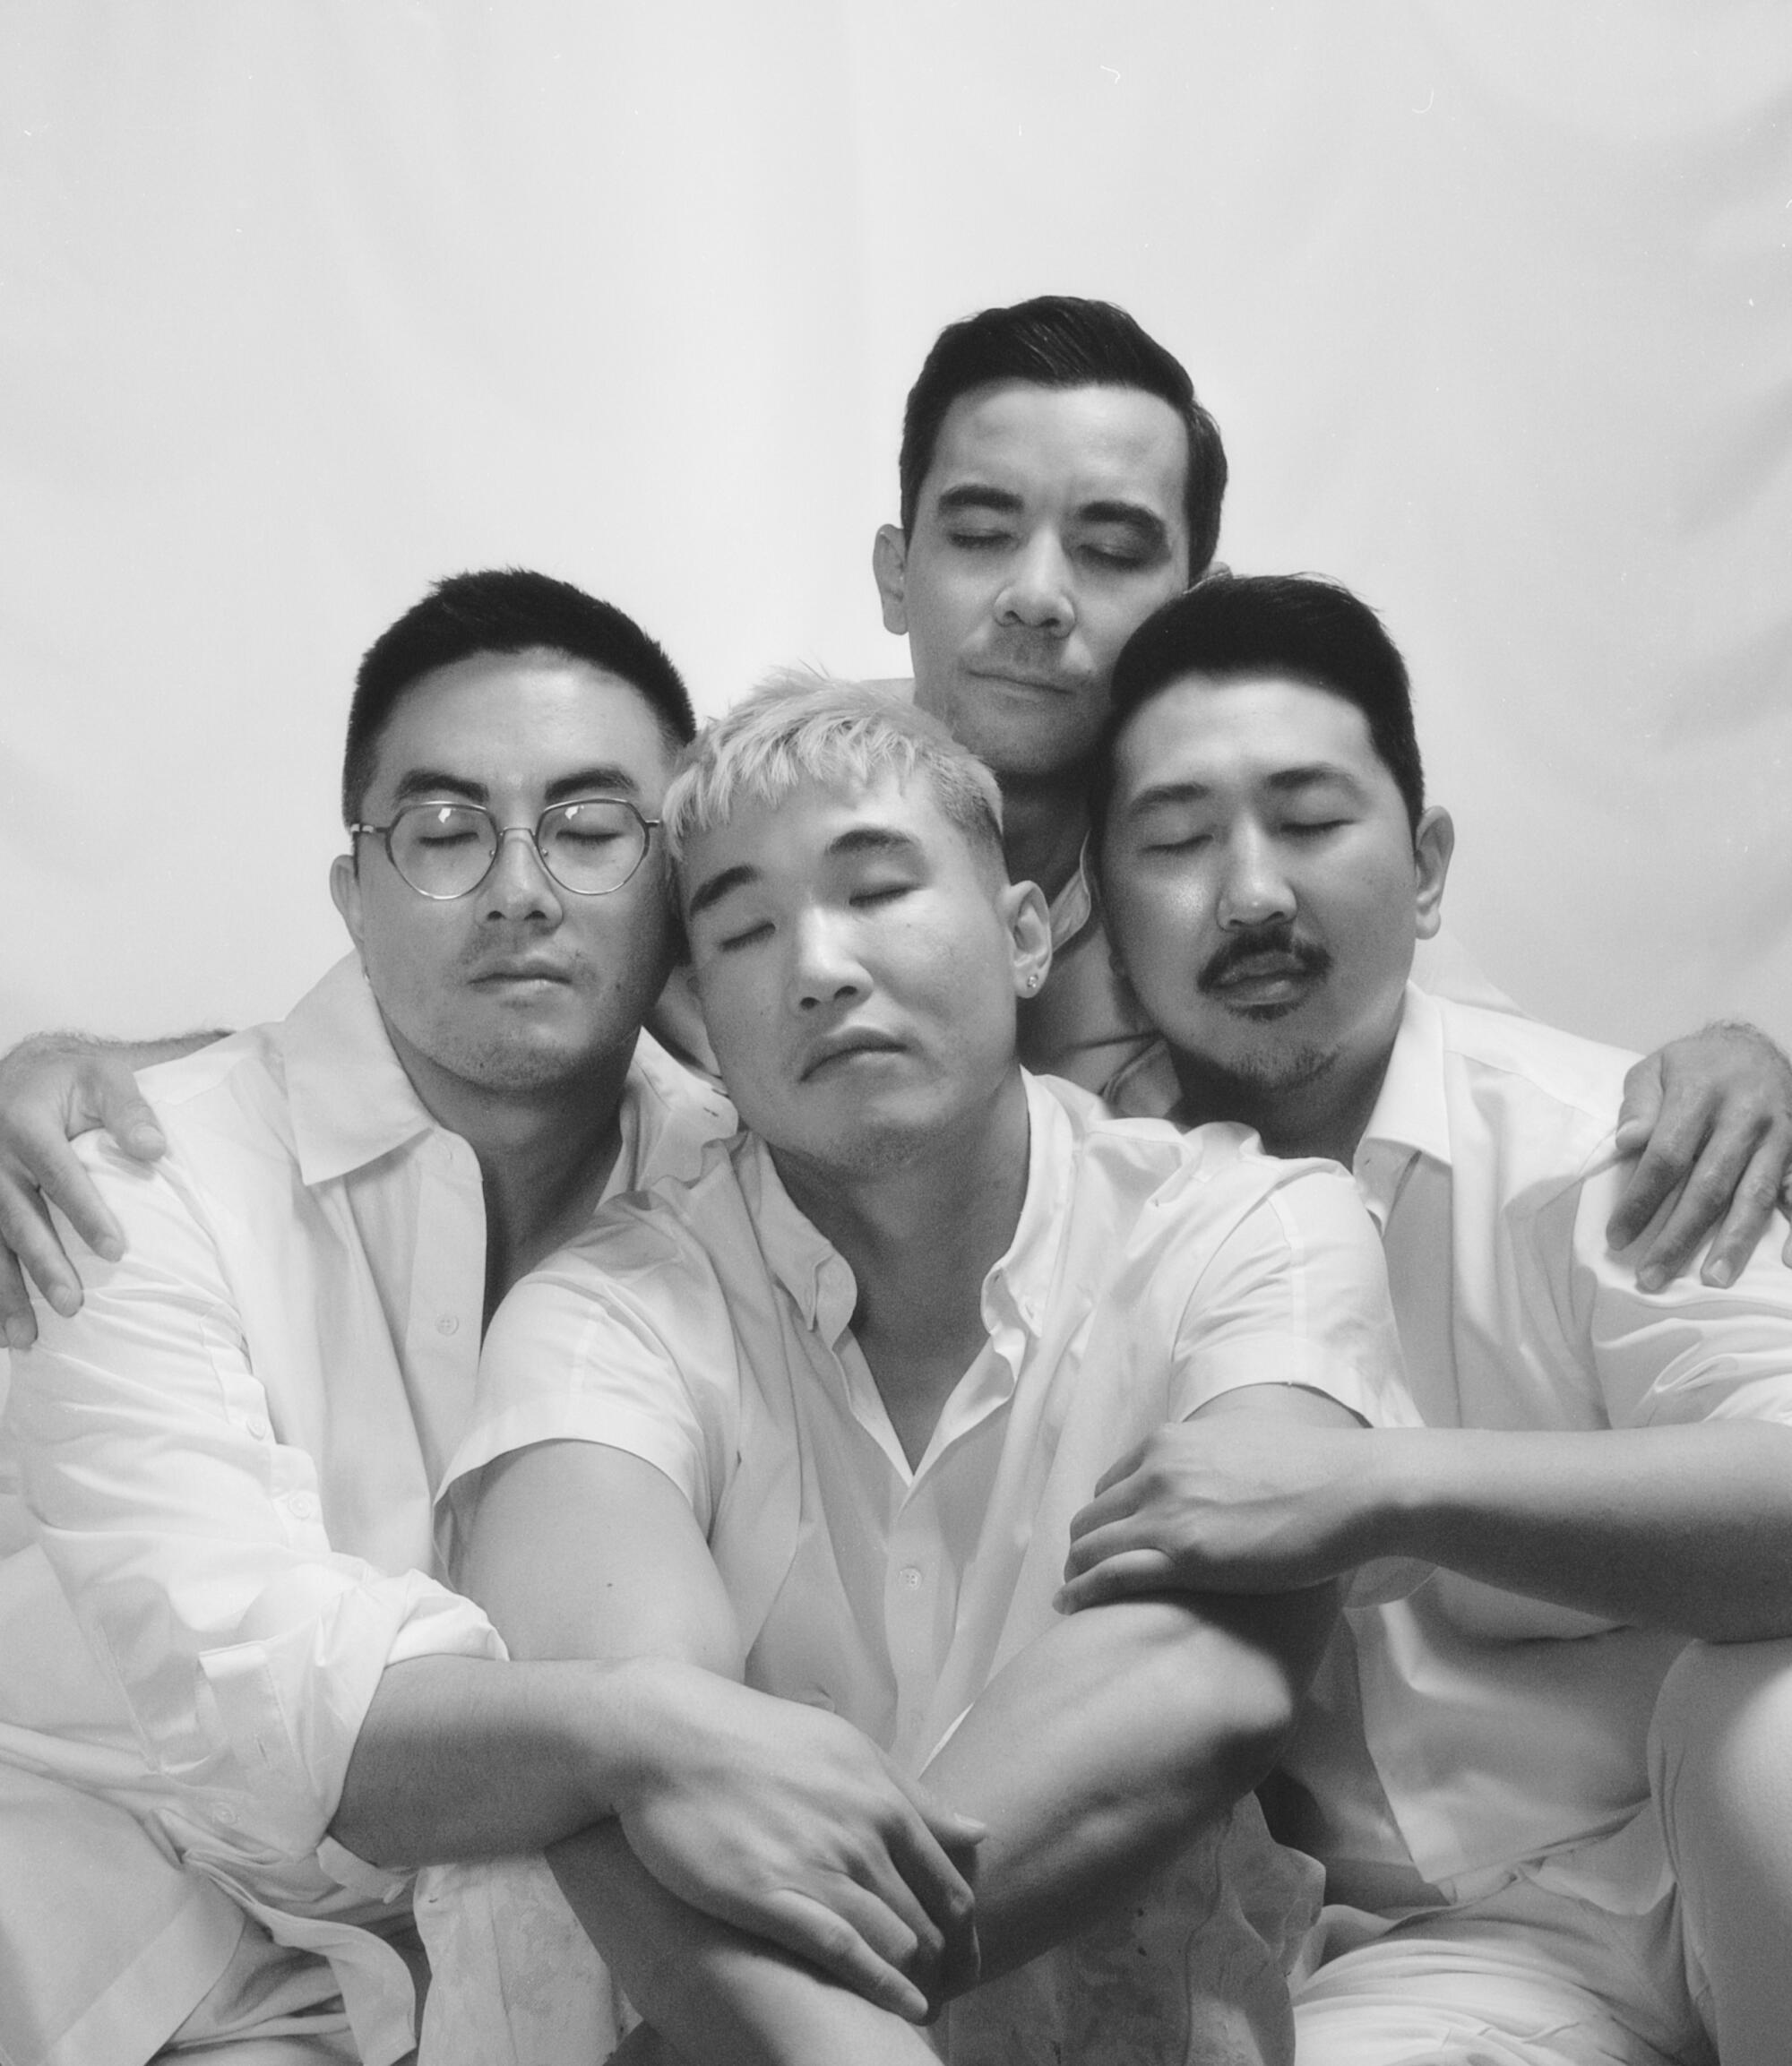 Bowen Yang, Joel Kim Booster, Conrad Ricamora and director Andrew Ahn of "Fire Island" photographed in a studio. 